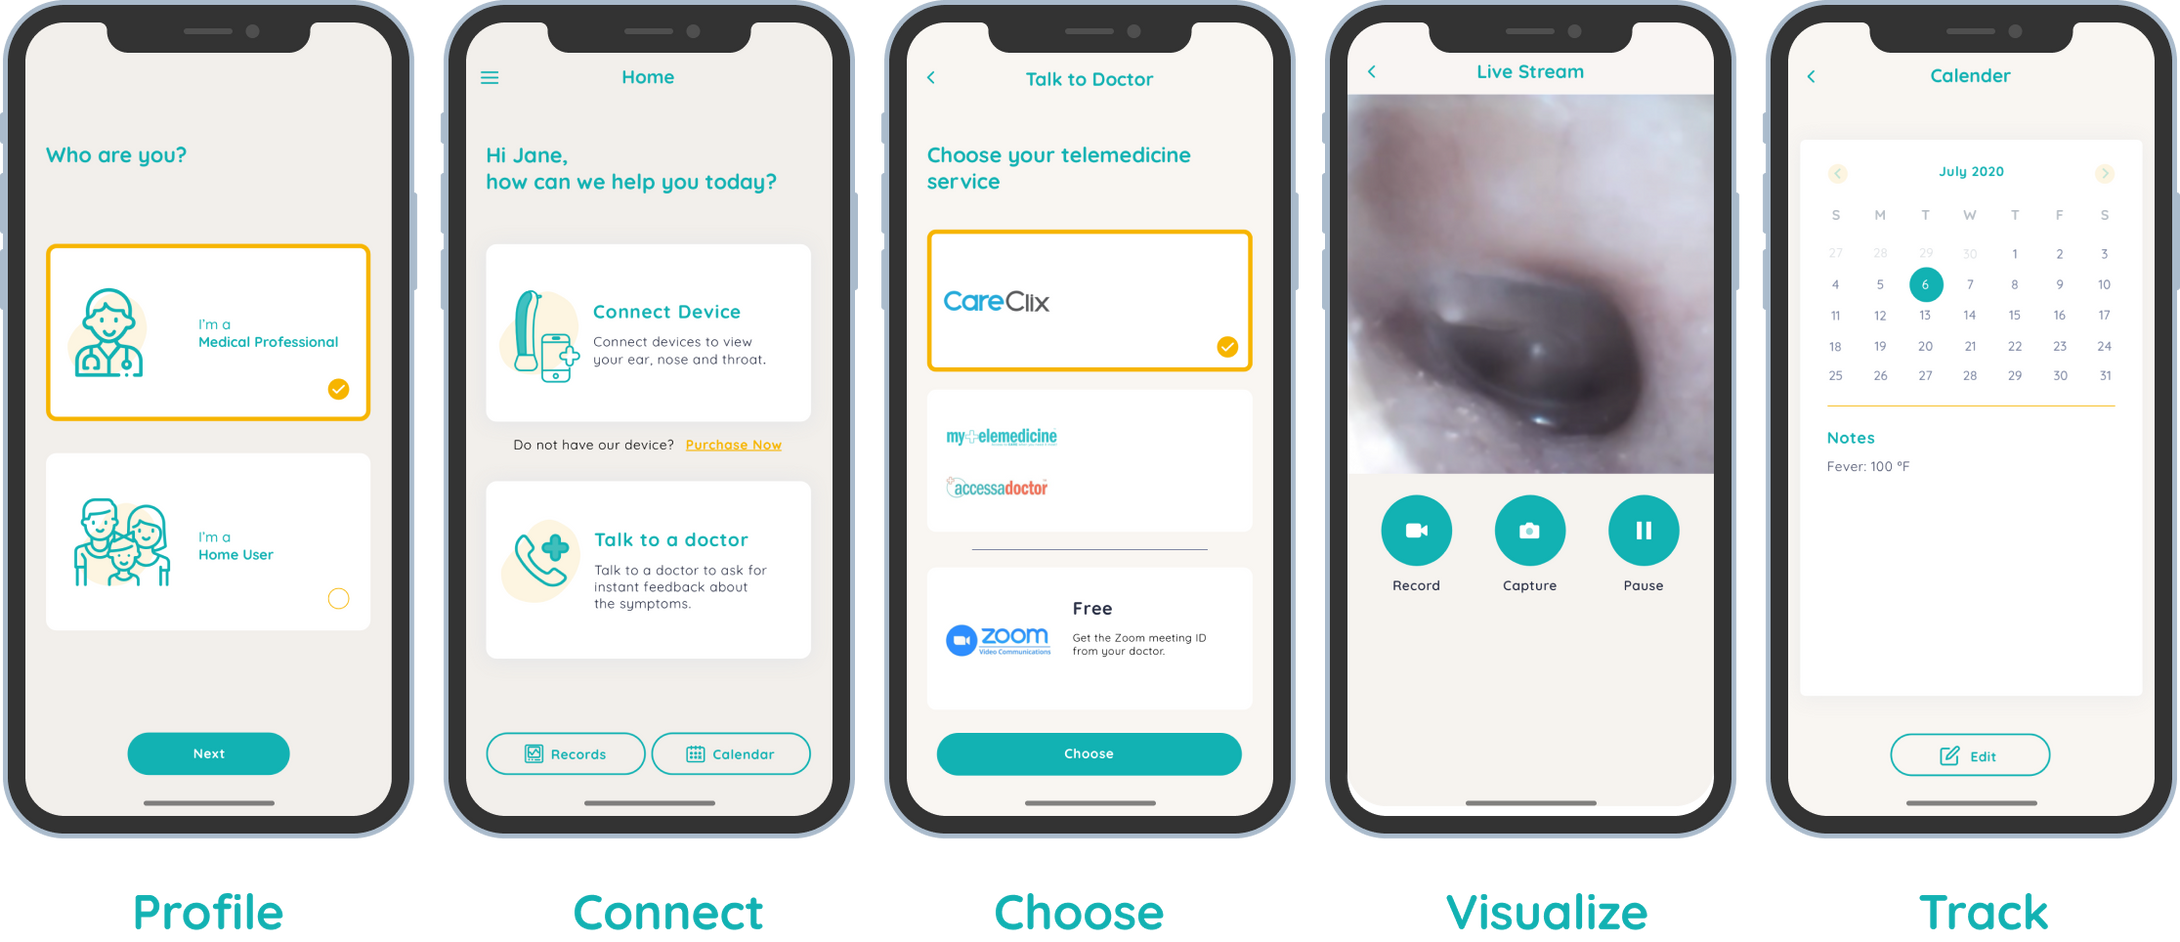 Free Remmie App used with the Remmie Ear Monitor and Otoscope for visualizing symptoms and connecting with care 24/7